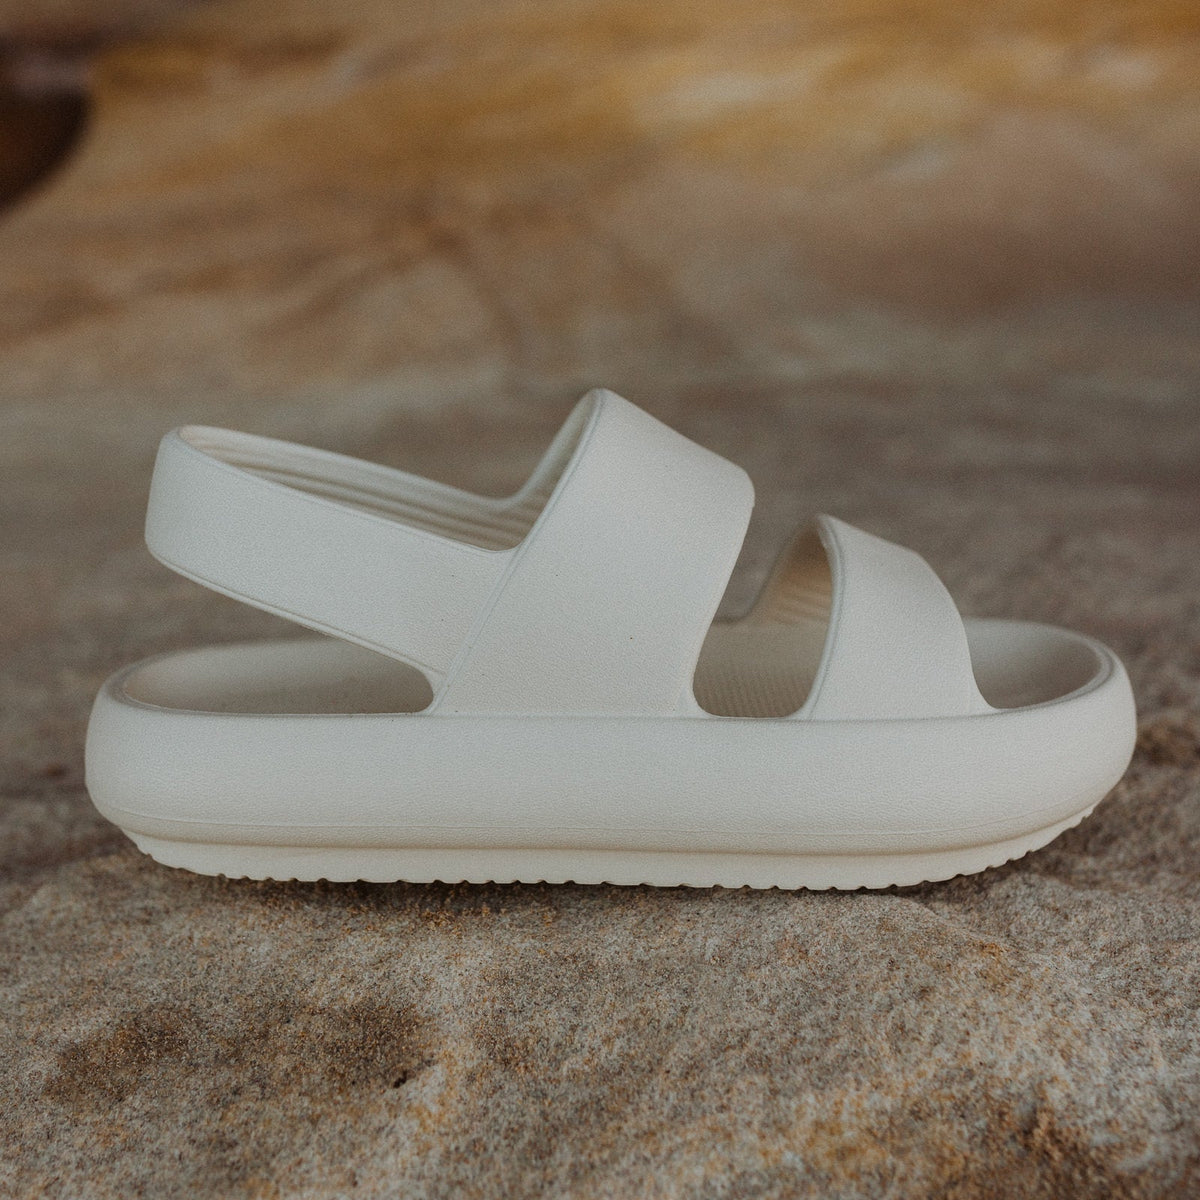 Cream Sand Nomad Shoes, Lightweight & Waterproof Sandals & Slides For All Terrain, RubbaBubba